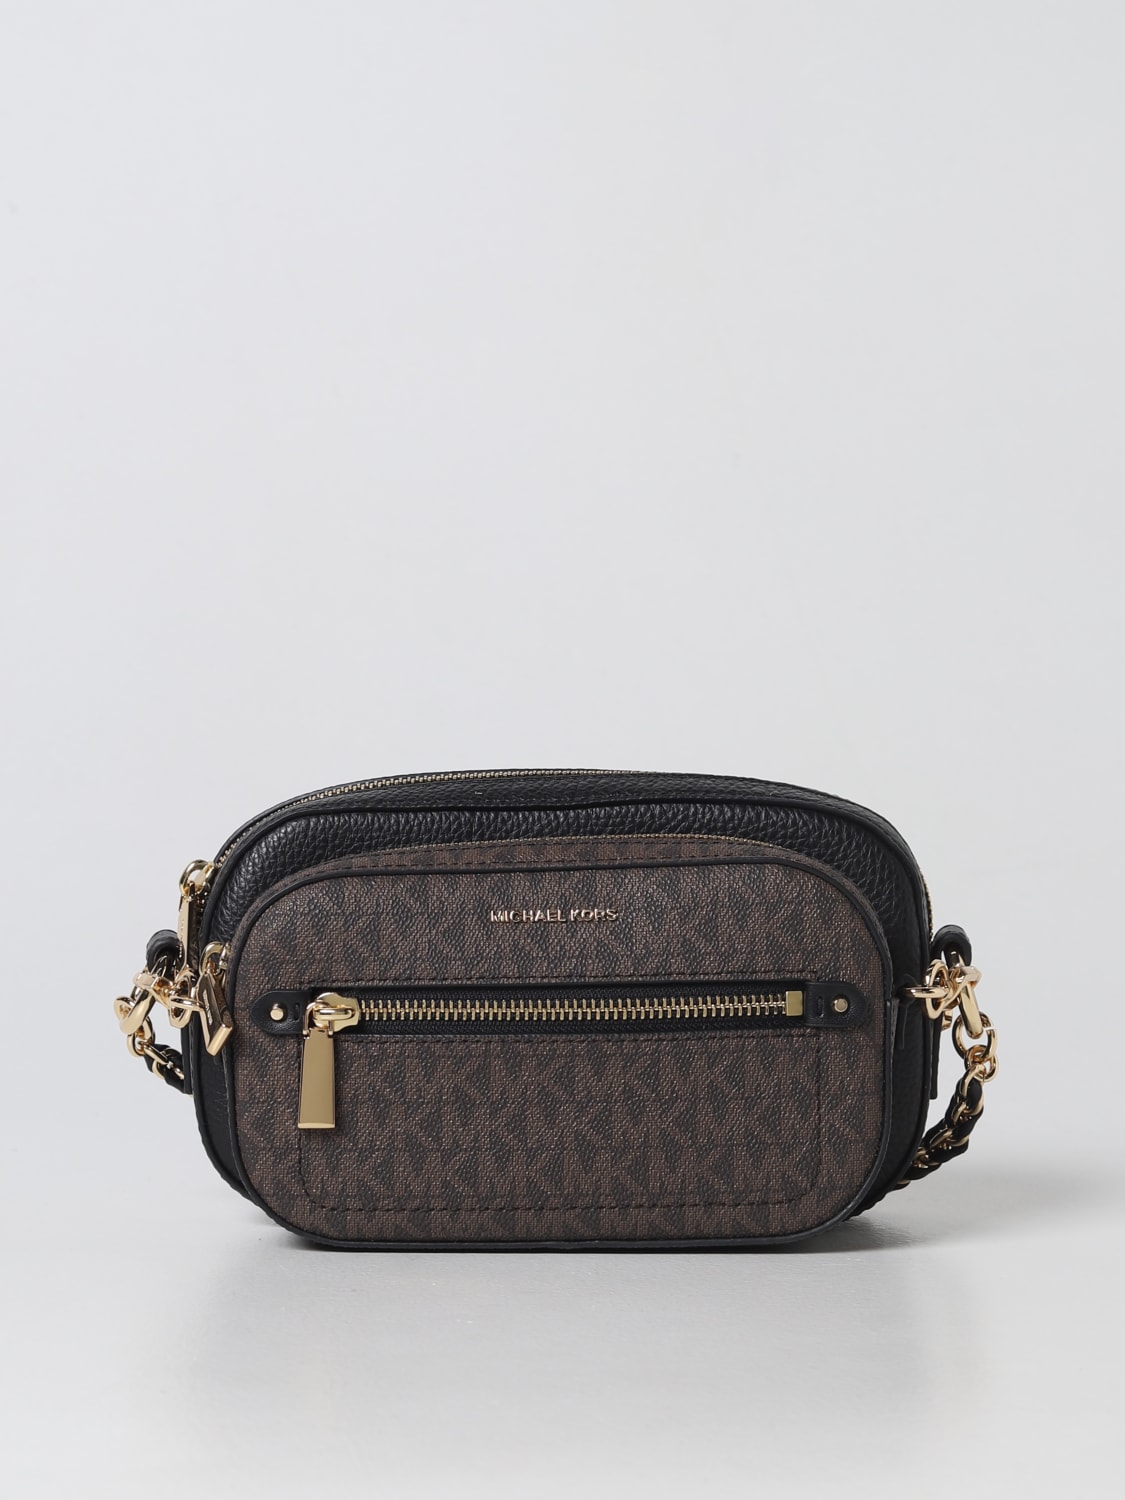 Michael Kors Outlet: Michael bag in grained leather - Black